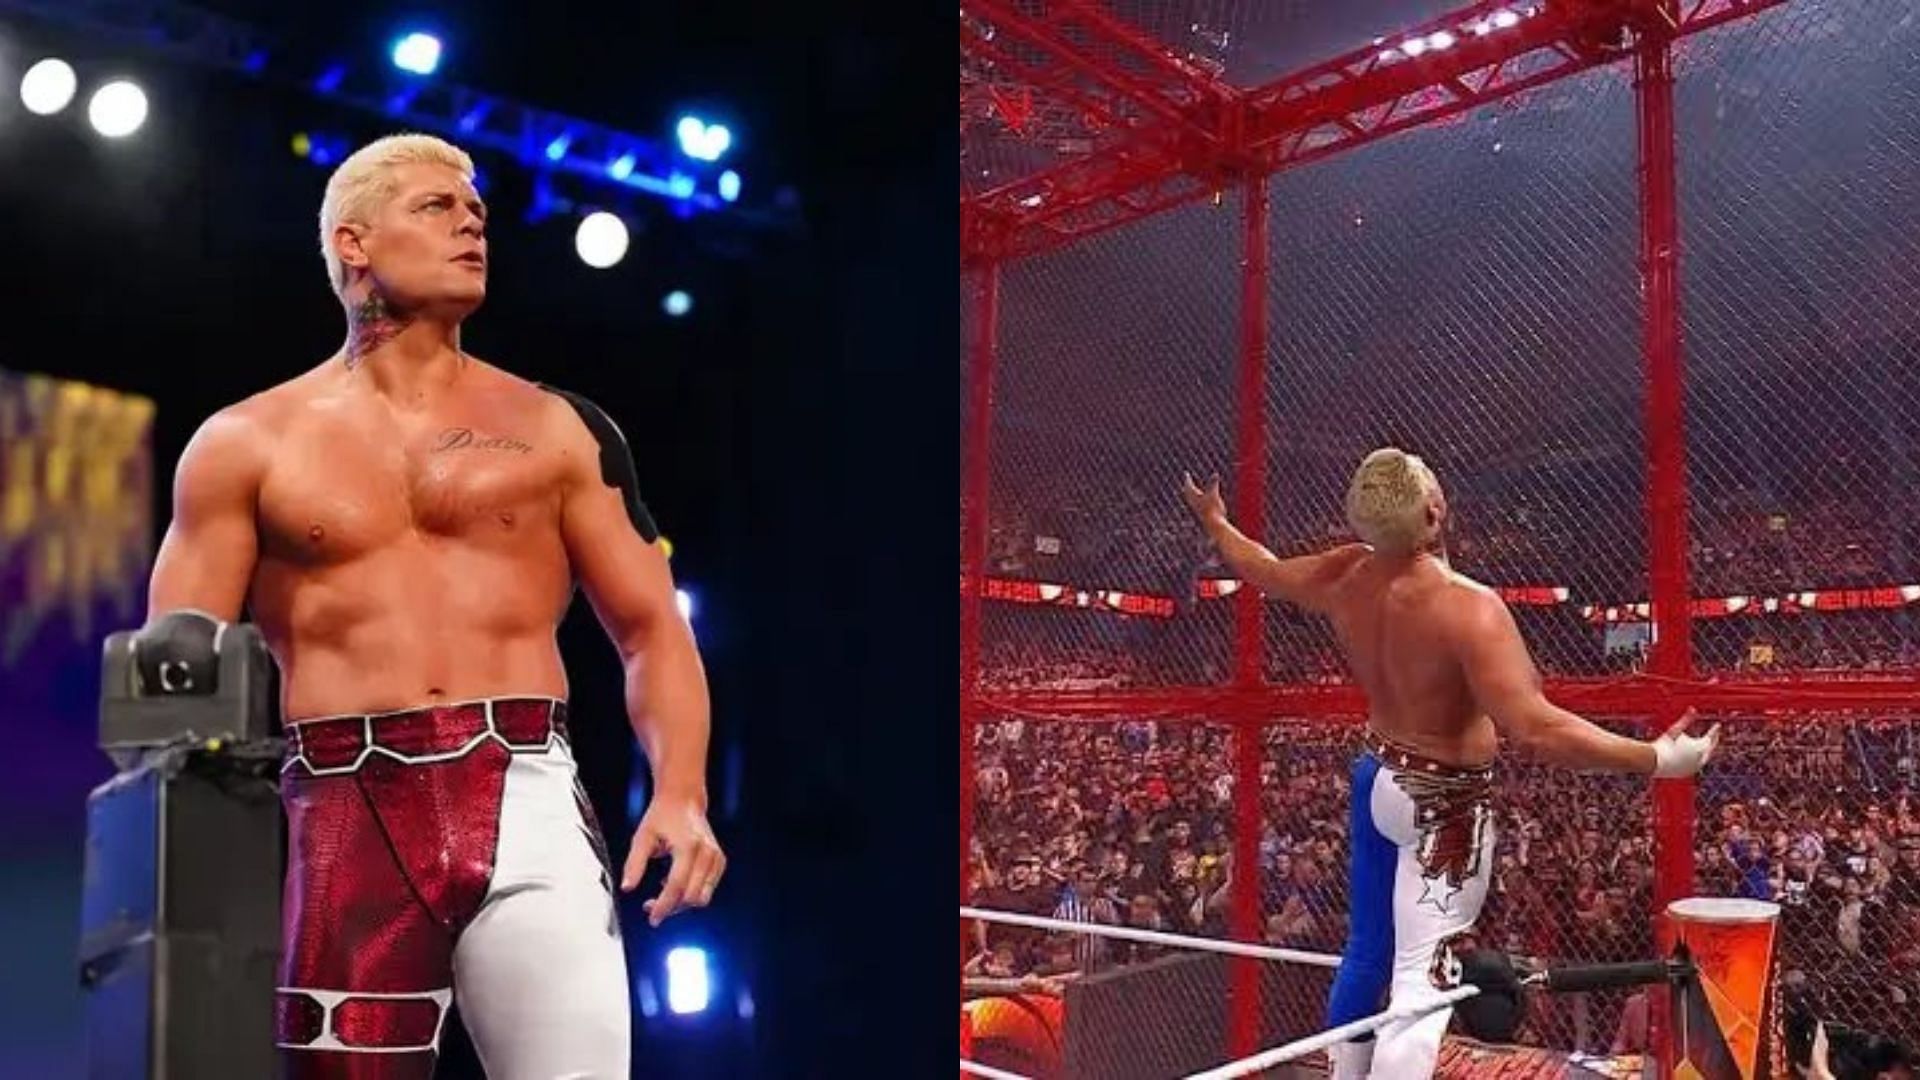 Cody Rhodes competed in a brutal match at Hell in a Cell